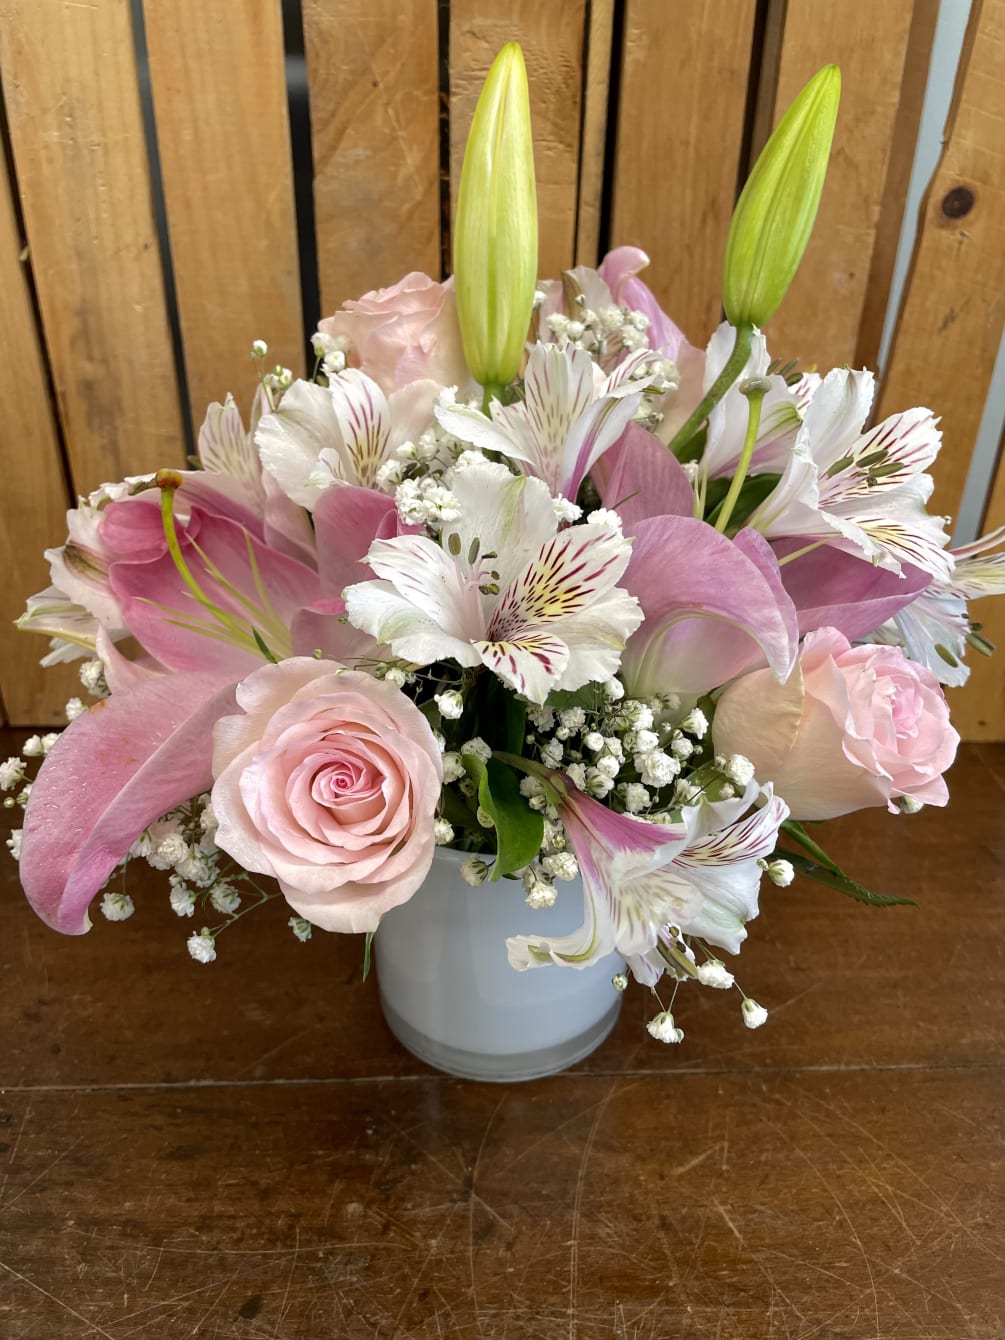 This lovely arrangement features delicate light pink and white blooms, including roses